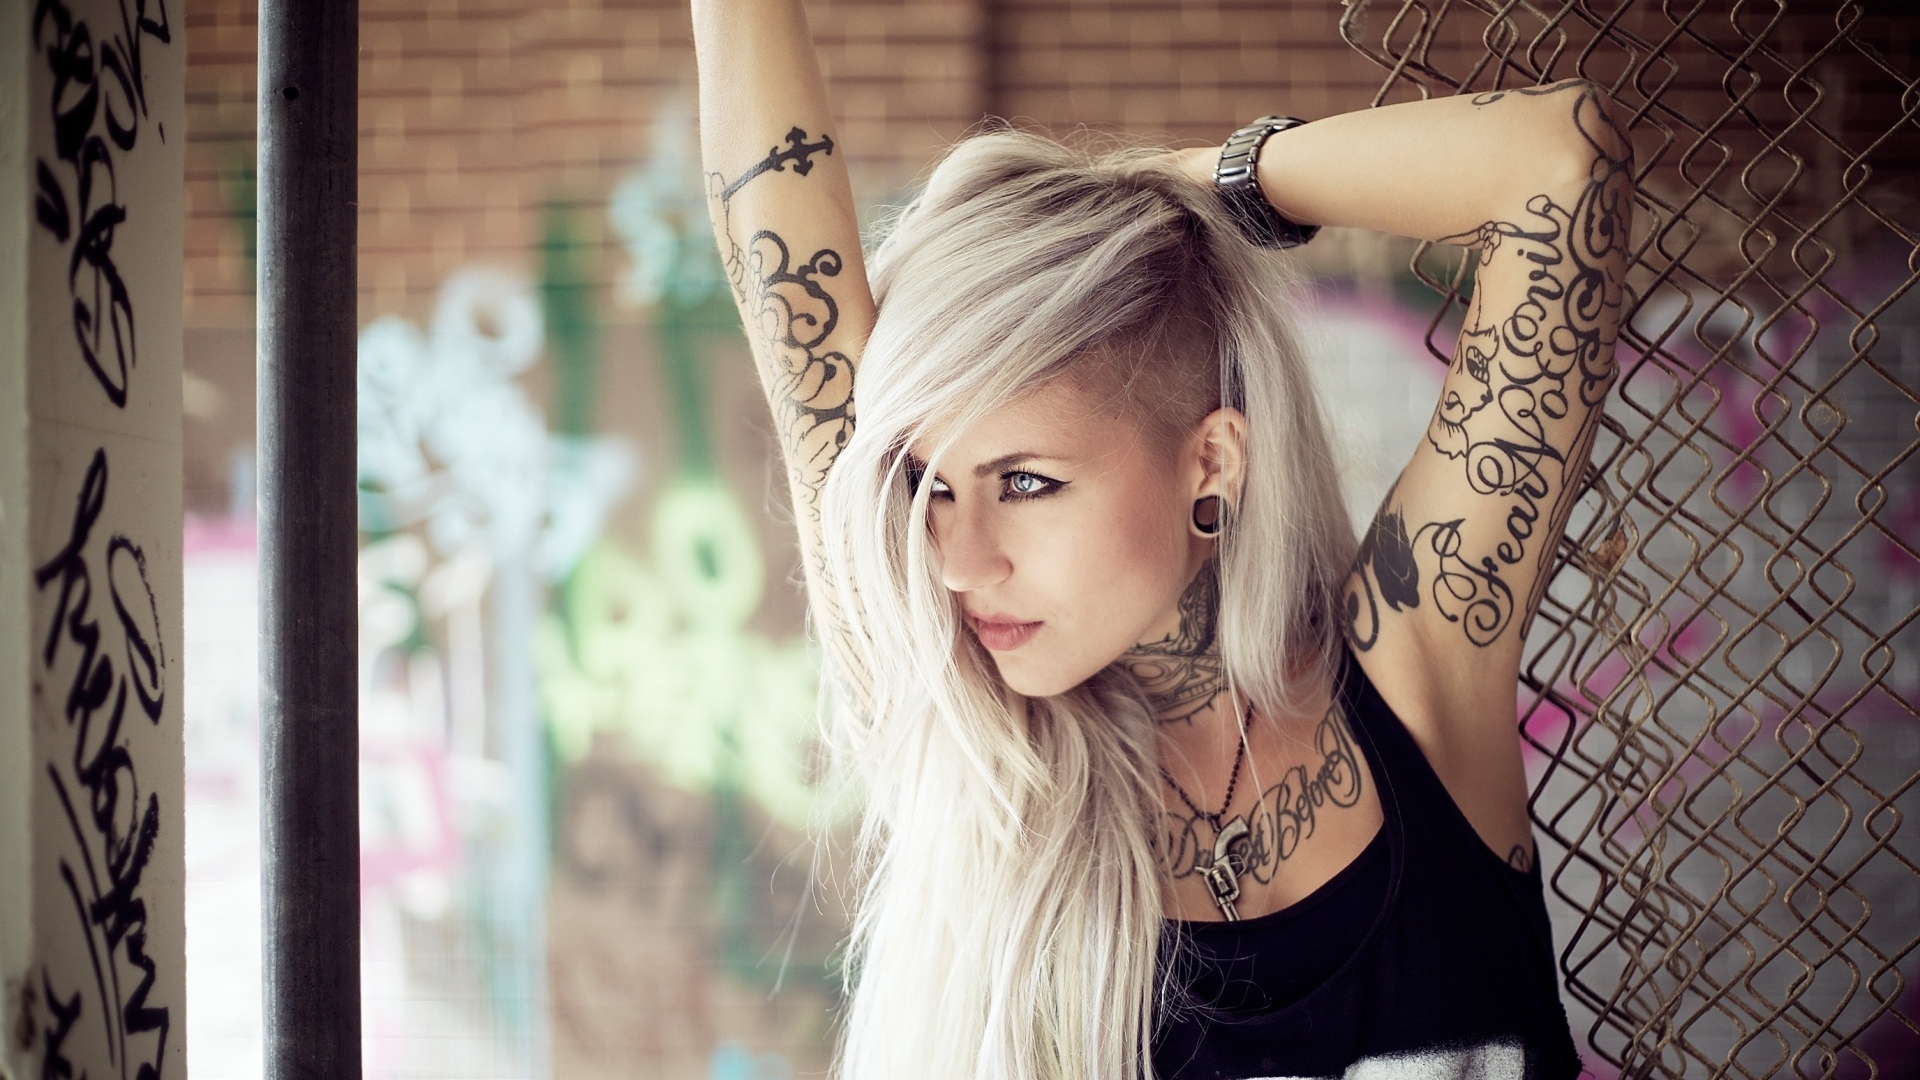 Beautiful blonde with tattoos on her body